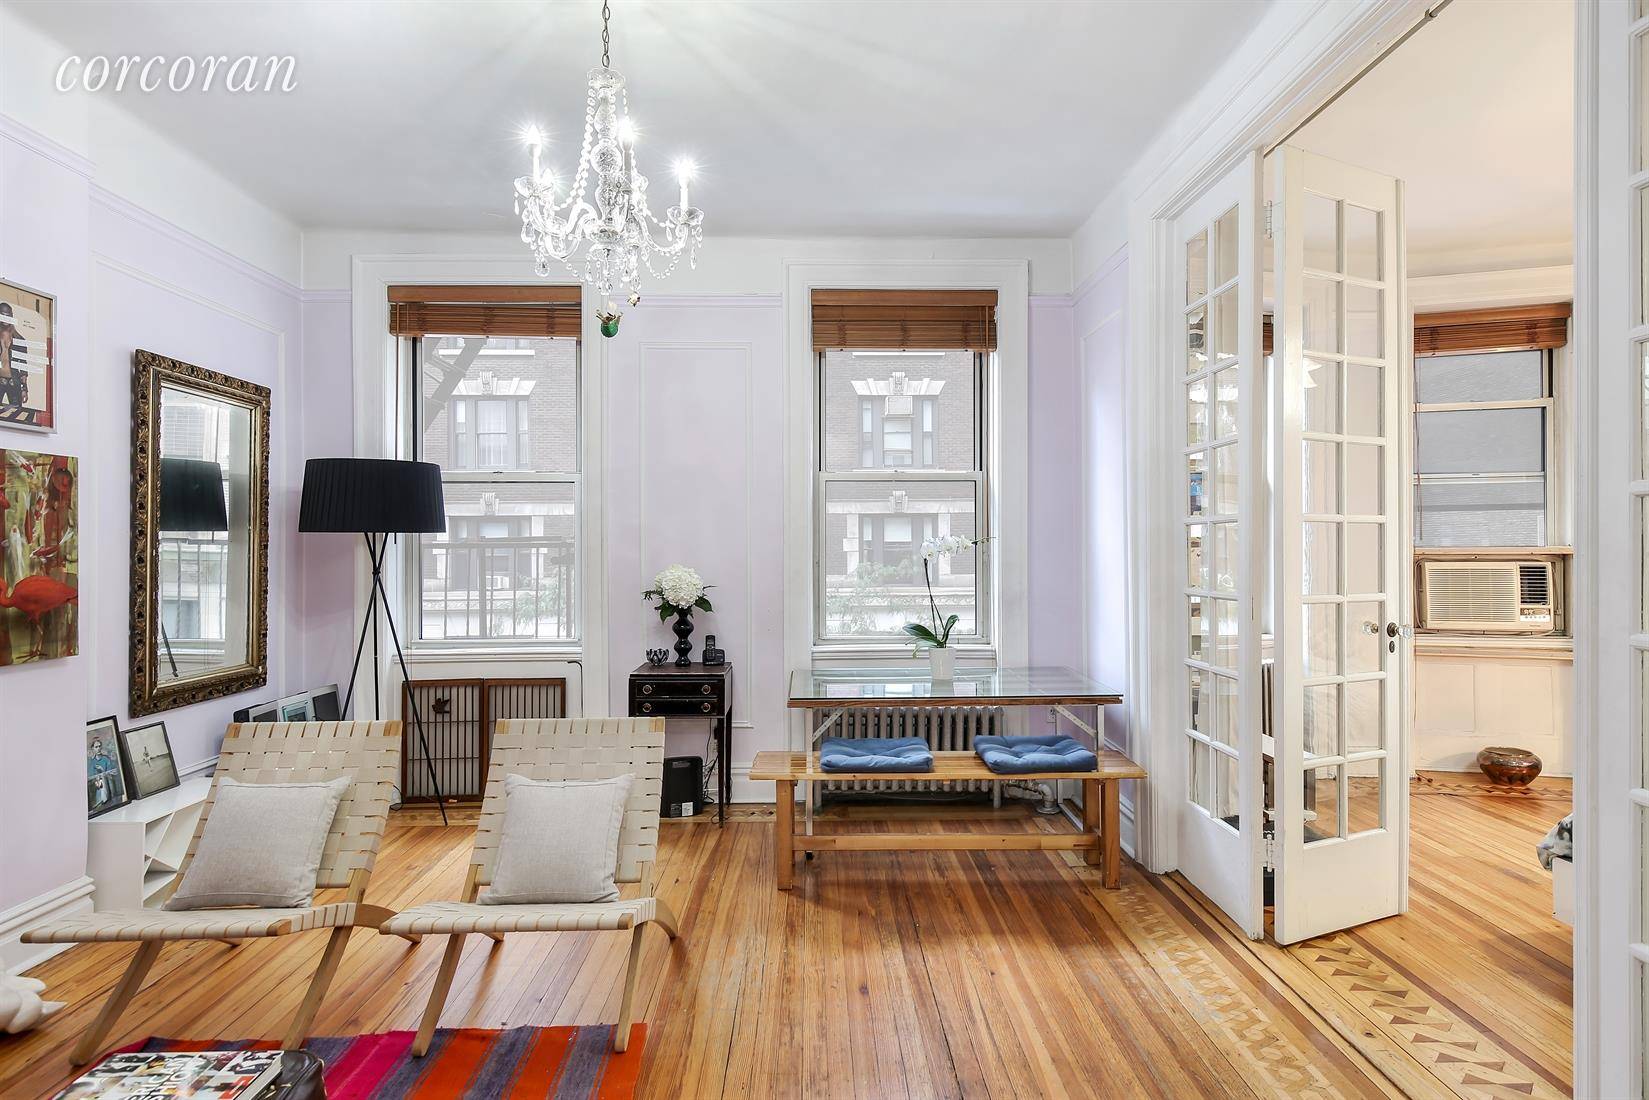 Filled with charm, packed with pre war details, this oversized one bedroom elevator home at 606 West 113th Street sits on a hill between Broadway and Riverside Drive on a ...